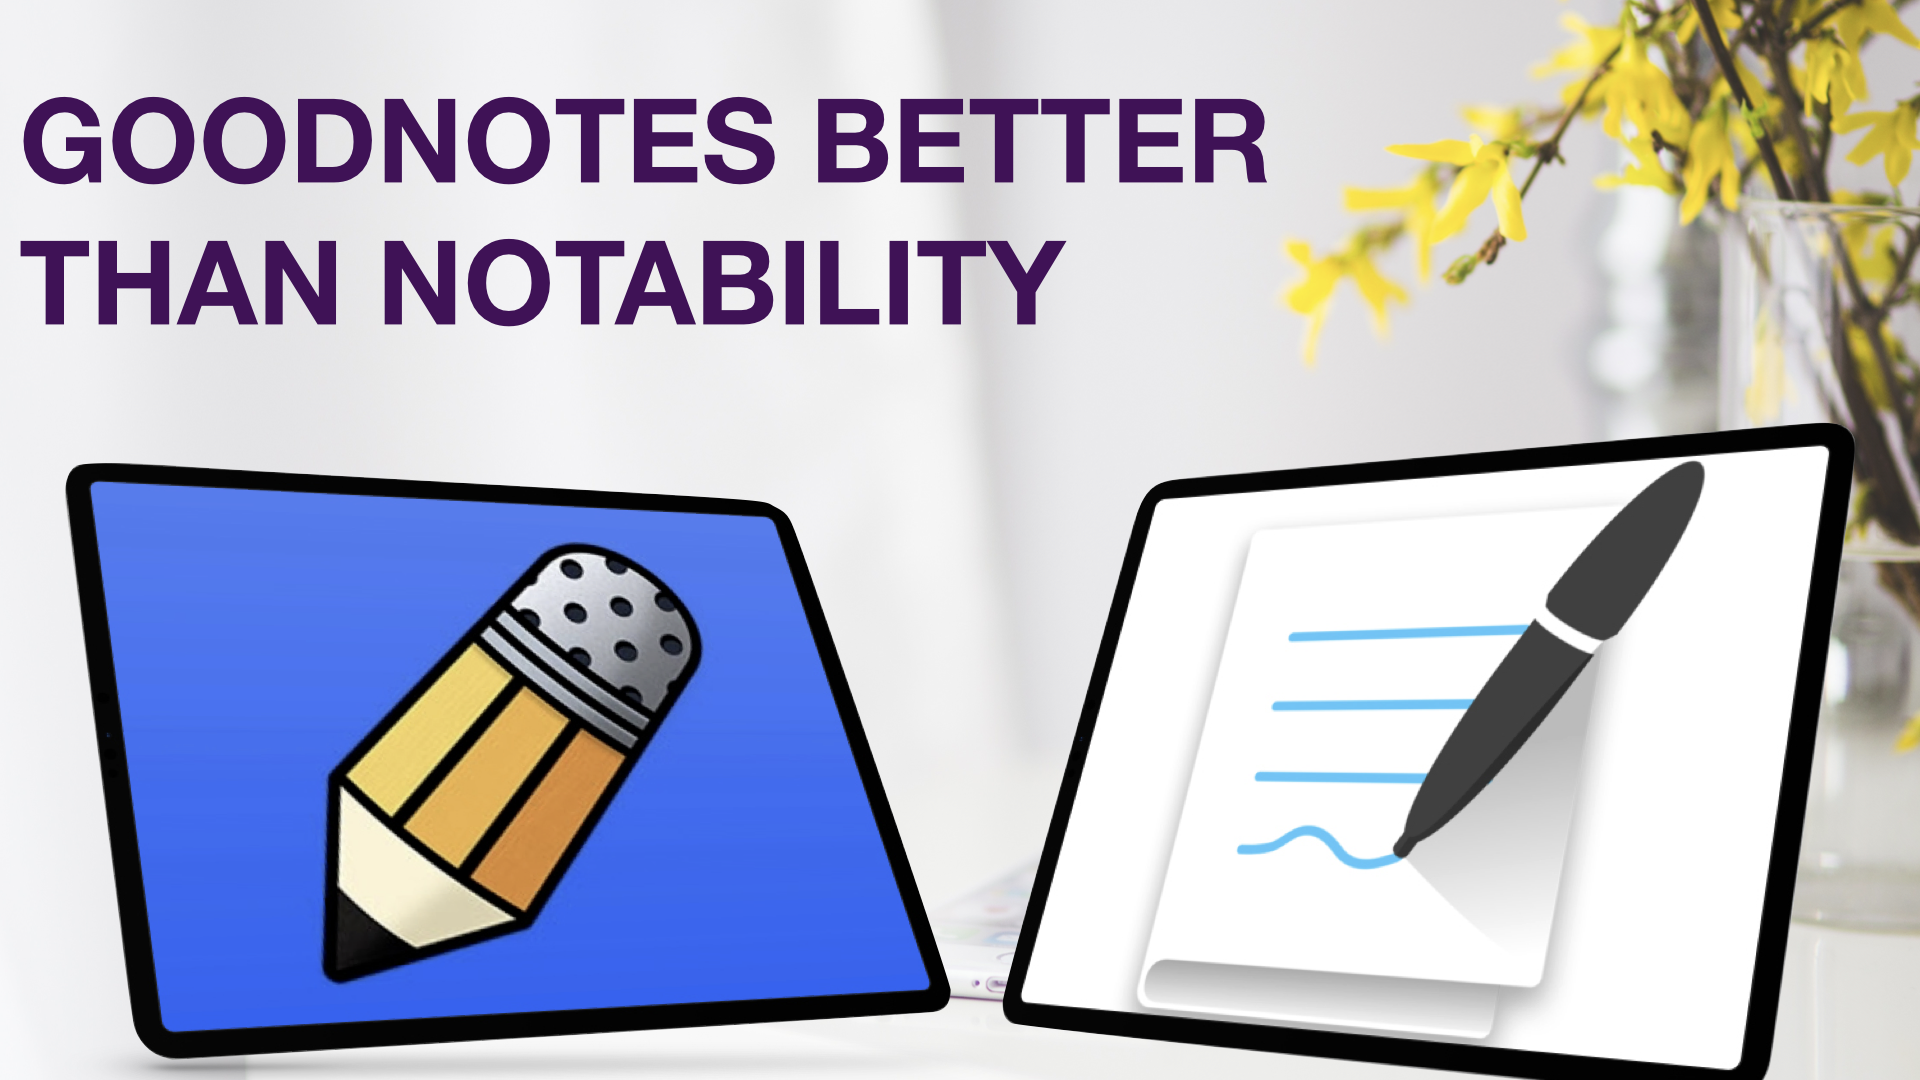 Two iPad Pros next to each other showing the Notability logo (left) and the GoodNotes one (right).